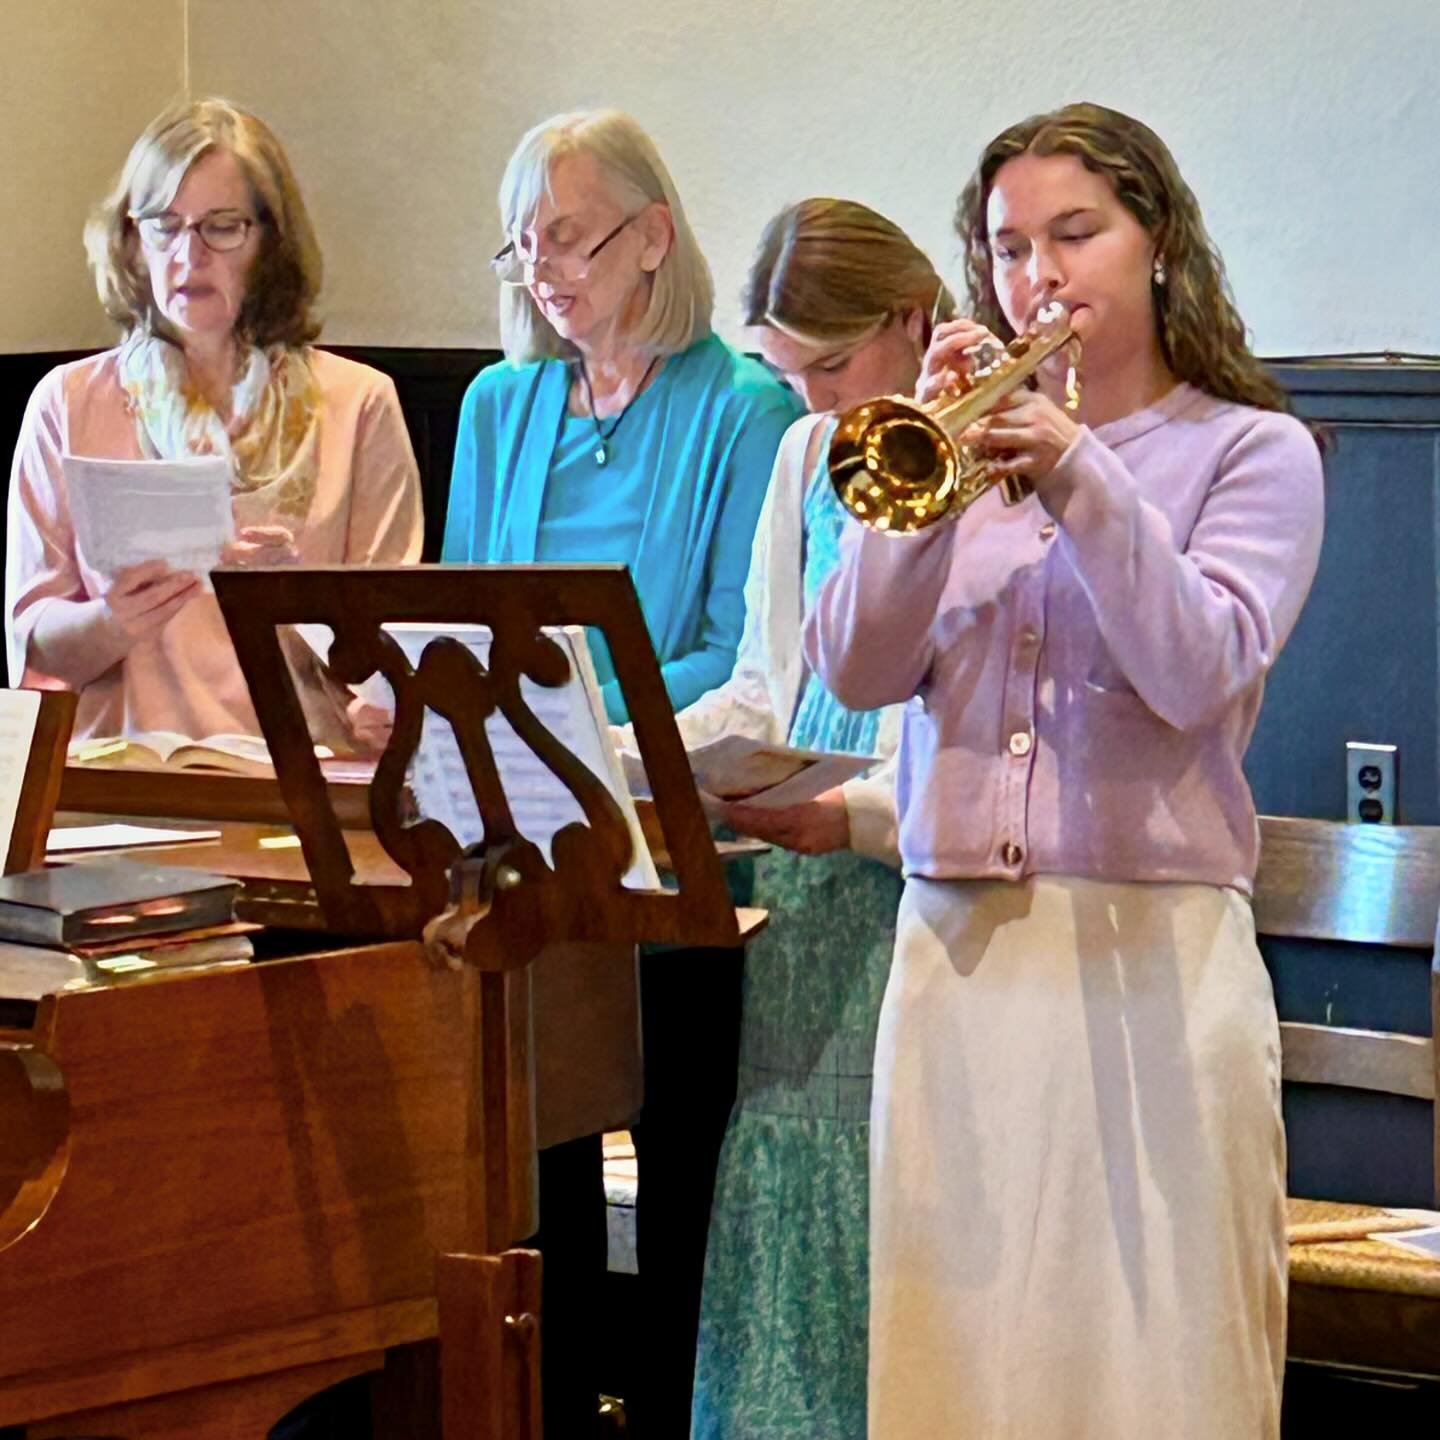 Easter Sunday at Church of the Advent: a full and joyful service with music from the choir, trumpet, and handbells; gorgeous flowers and colors; youth leading worship, in the aisle (narrowed by folding chairs), and helping Rev. Lynn bless water after